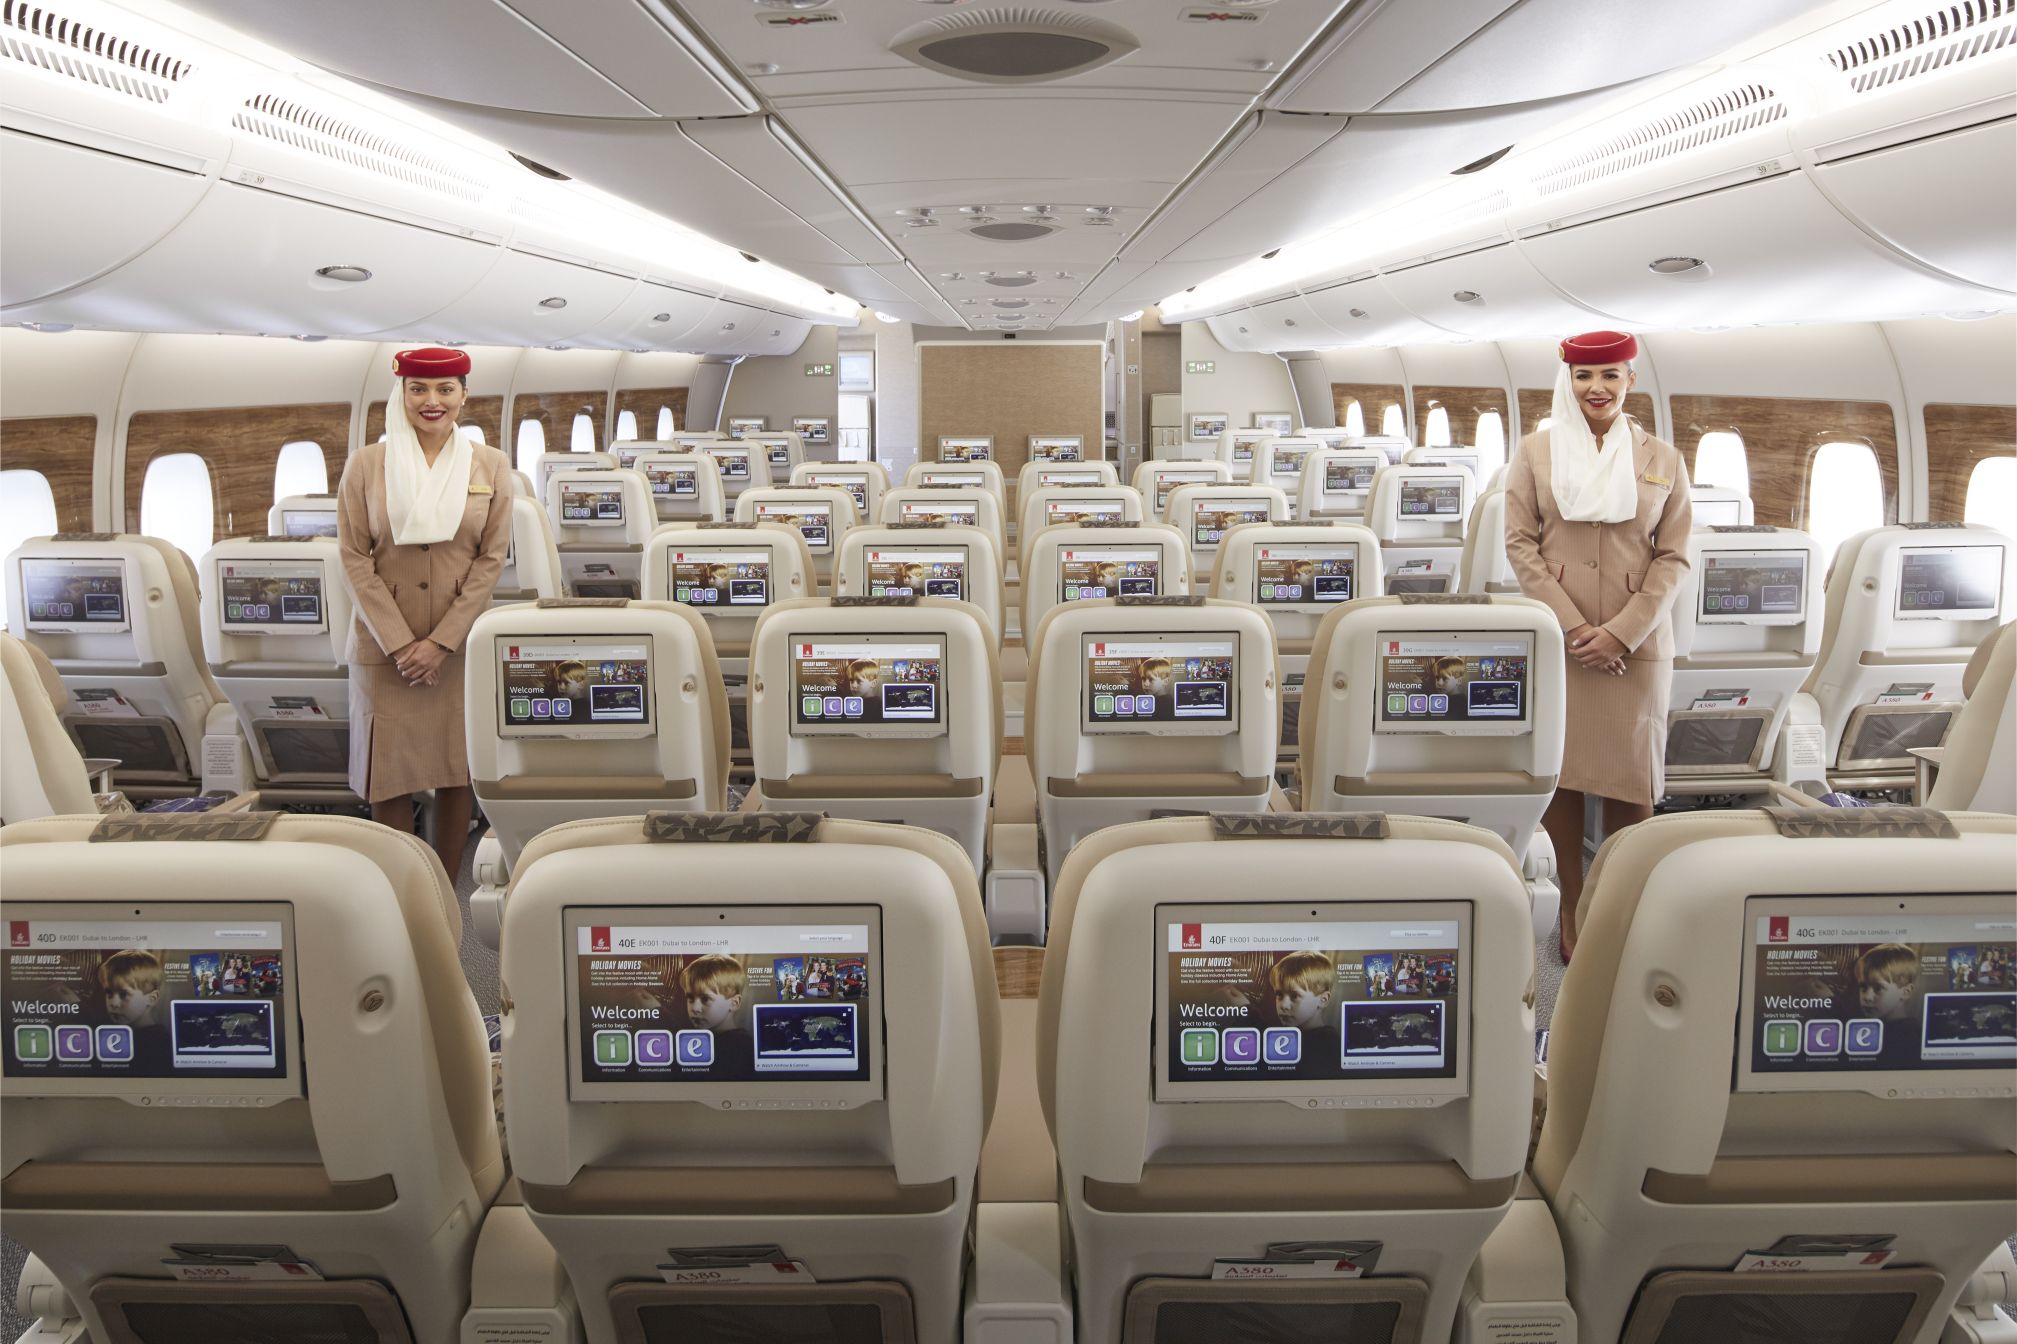 Dubai's Emirates Airlines adds luxurious new premium economy product as part of new enhancements included on its newest A380 aircraft.  